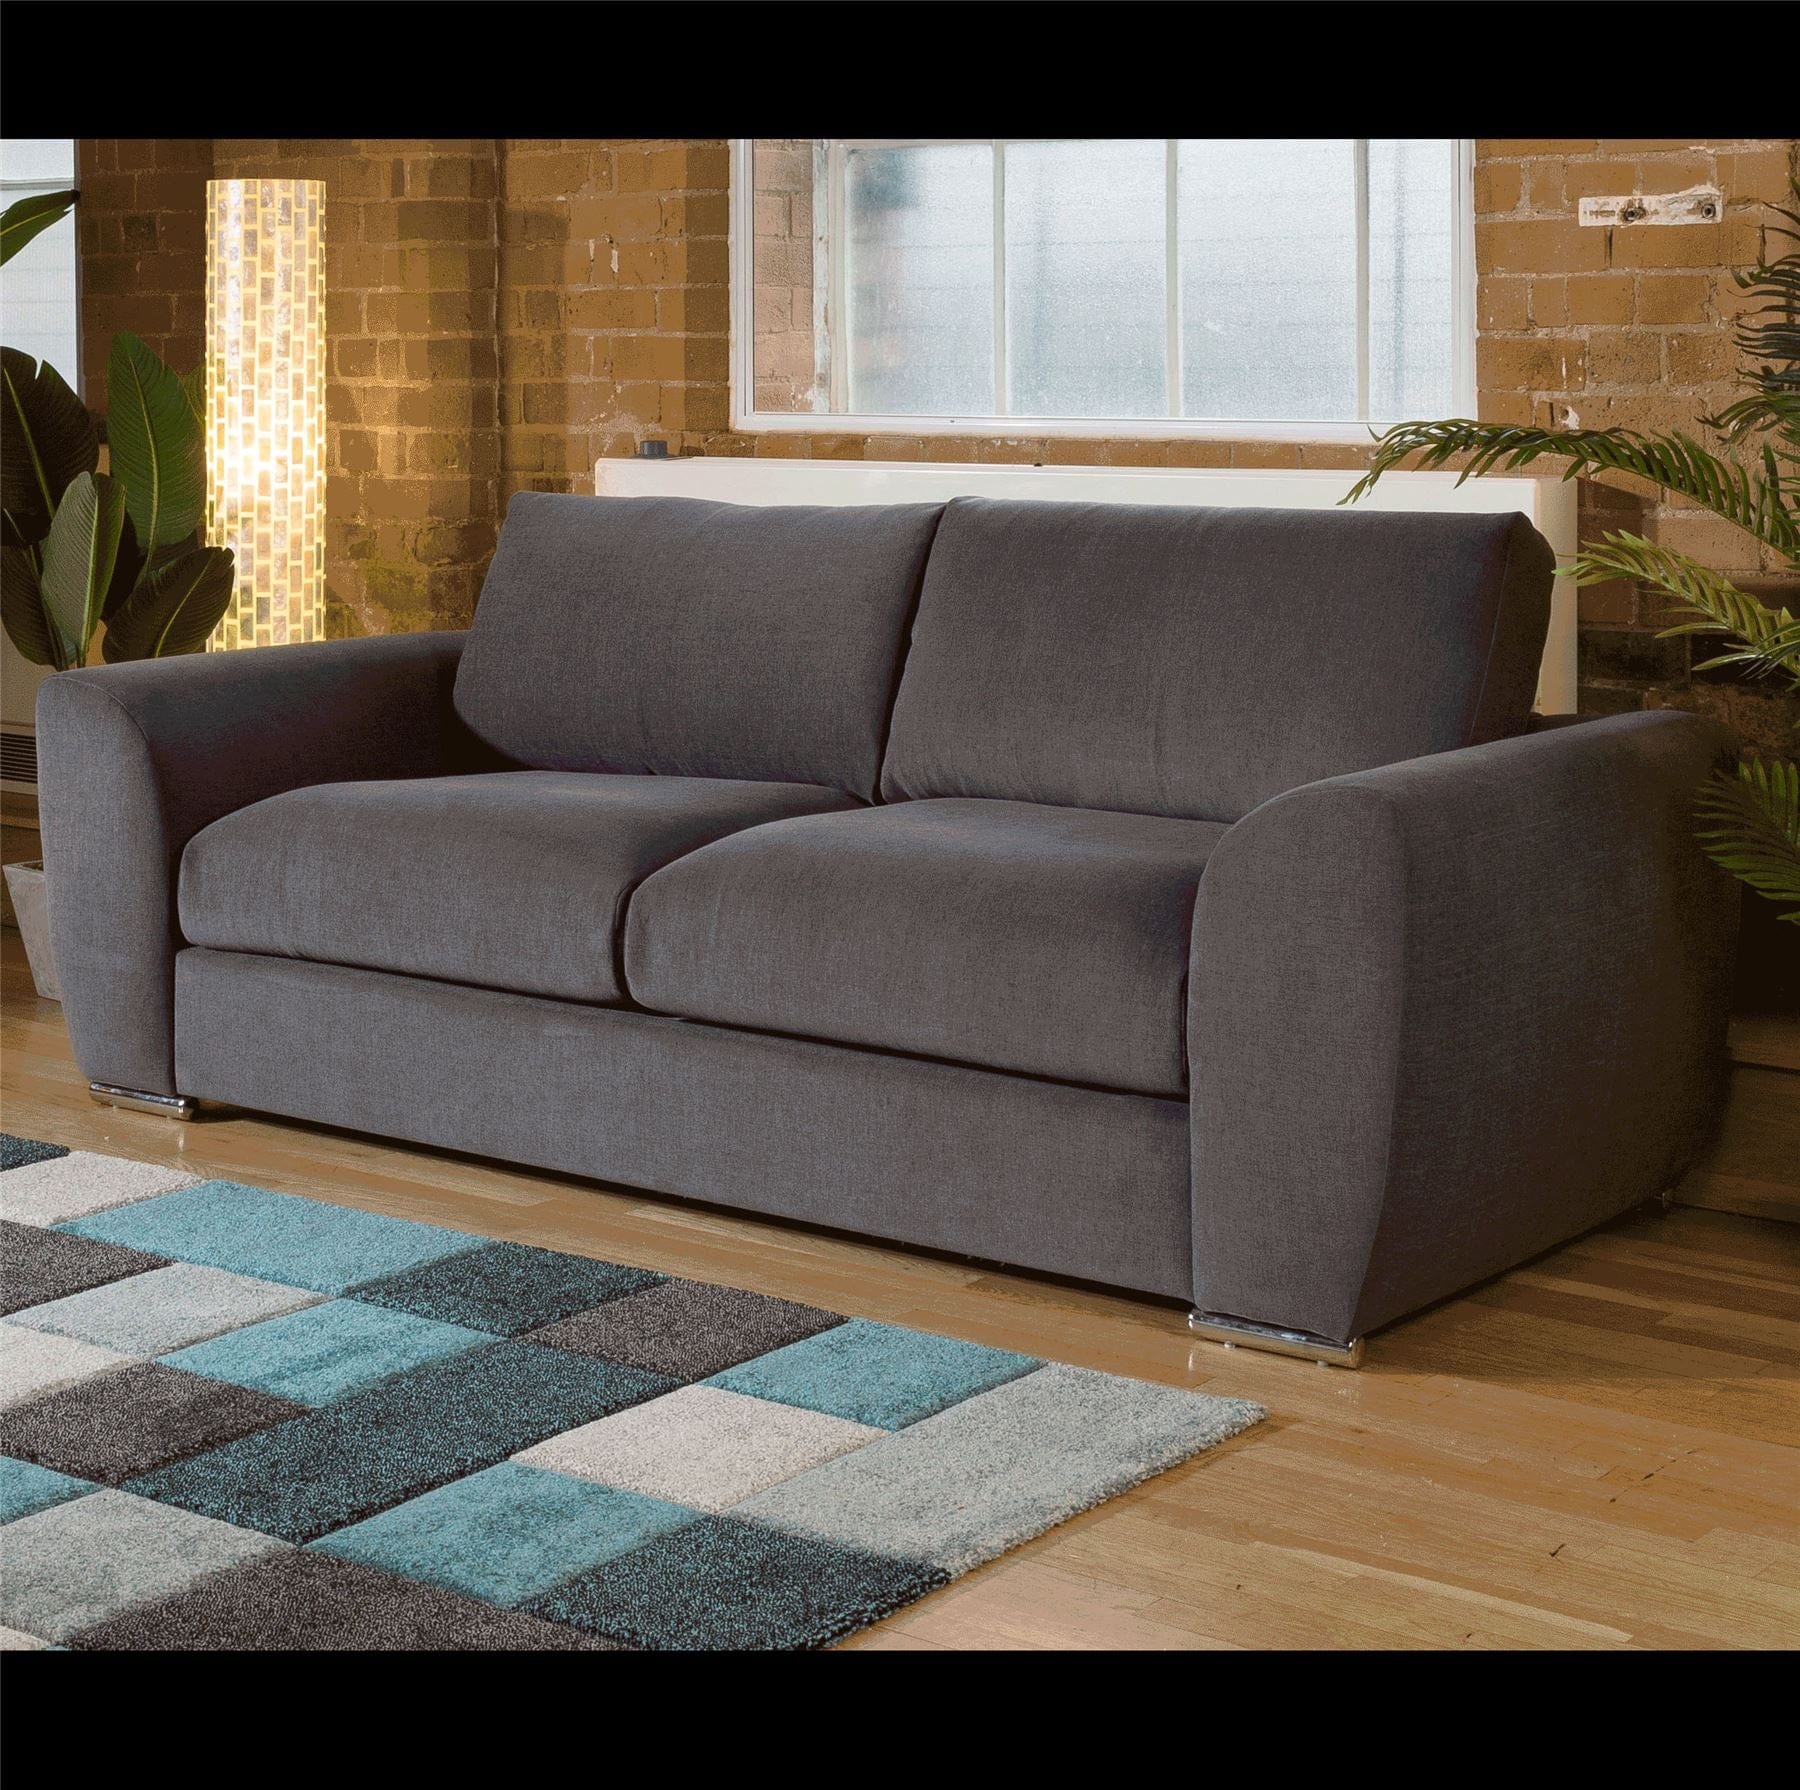 Quatropi Quatropi Modern Large 2400mm wide 3 Seater Settee / Sofabed with arms